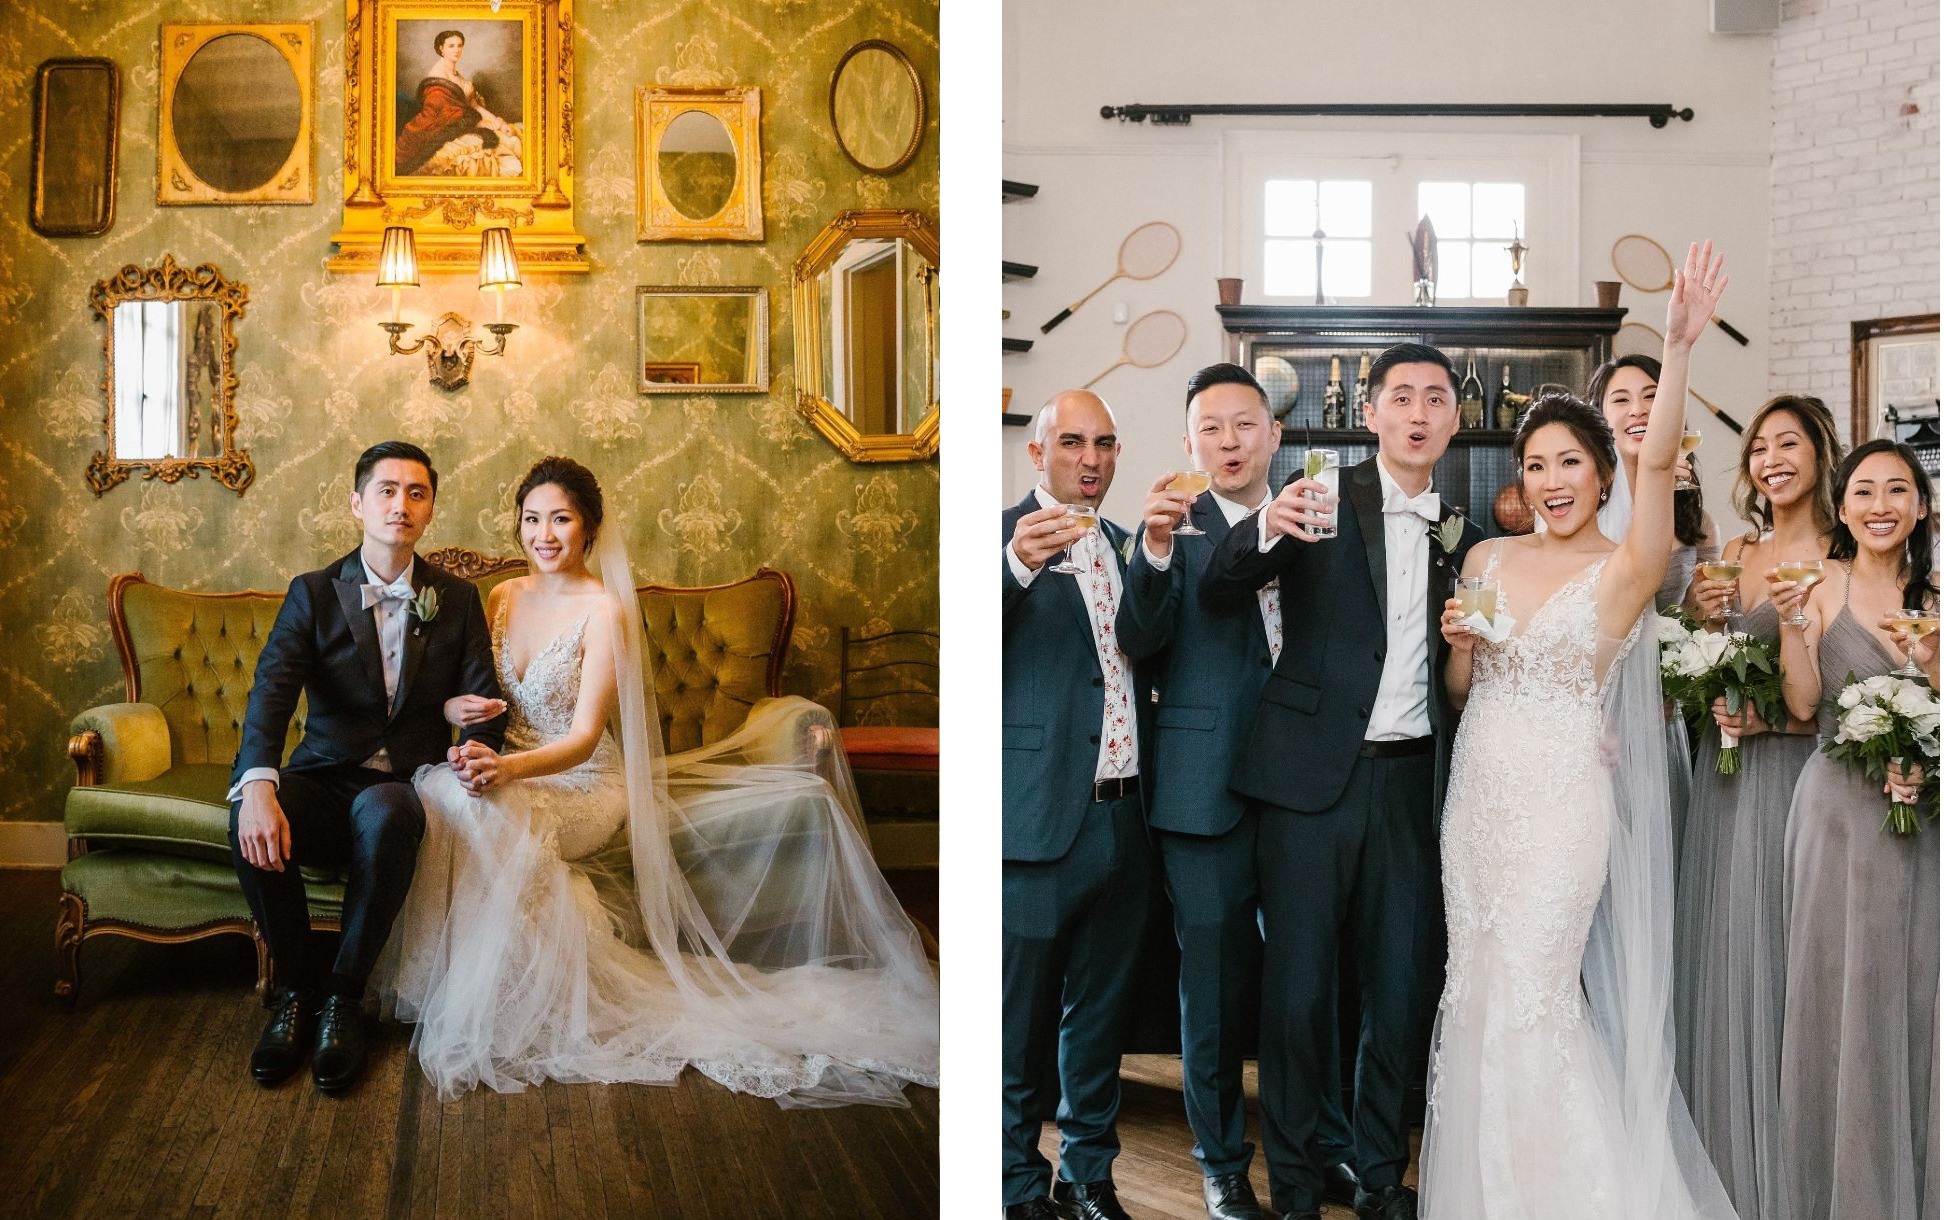 Left, bride and groom on green tufted couch. Right, bride and groom celebrating with wedding party